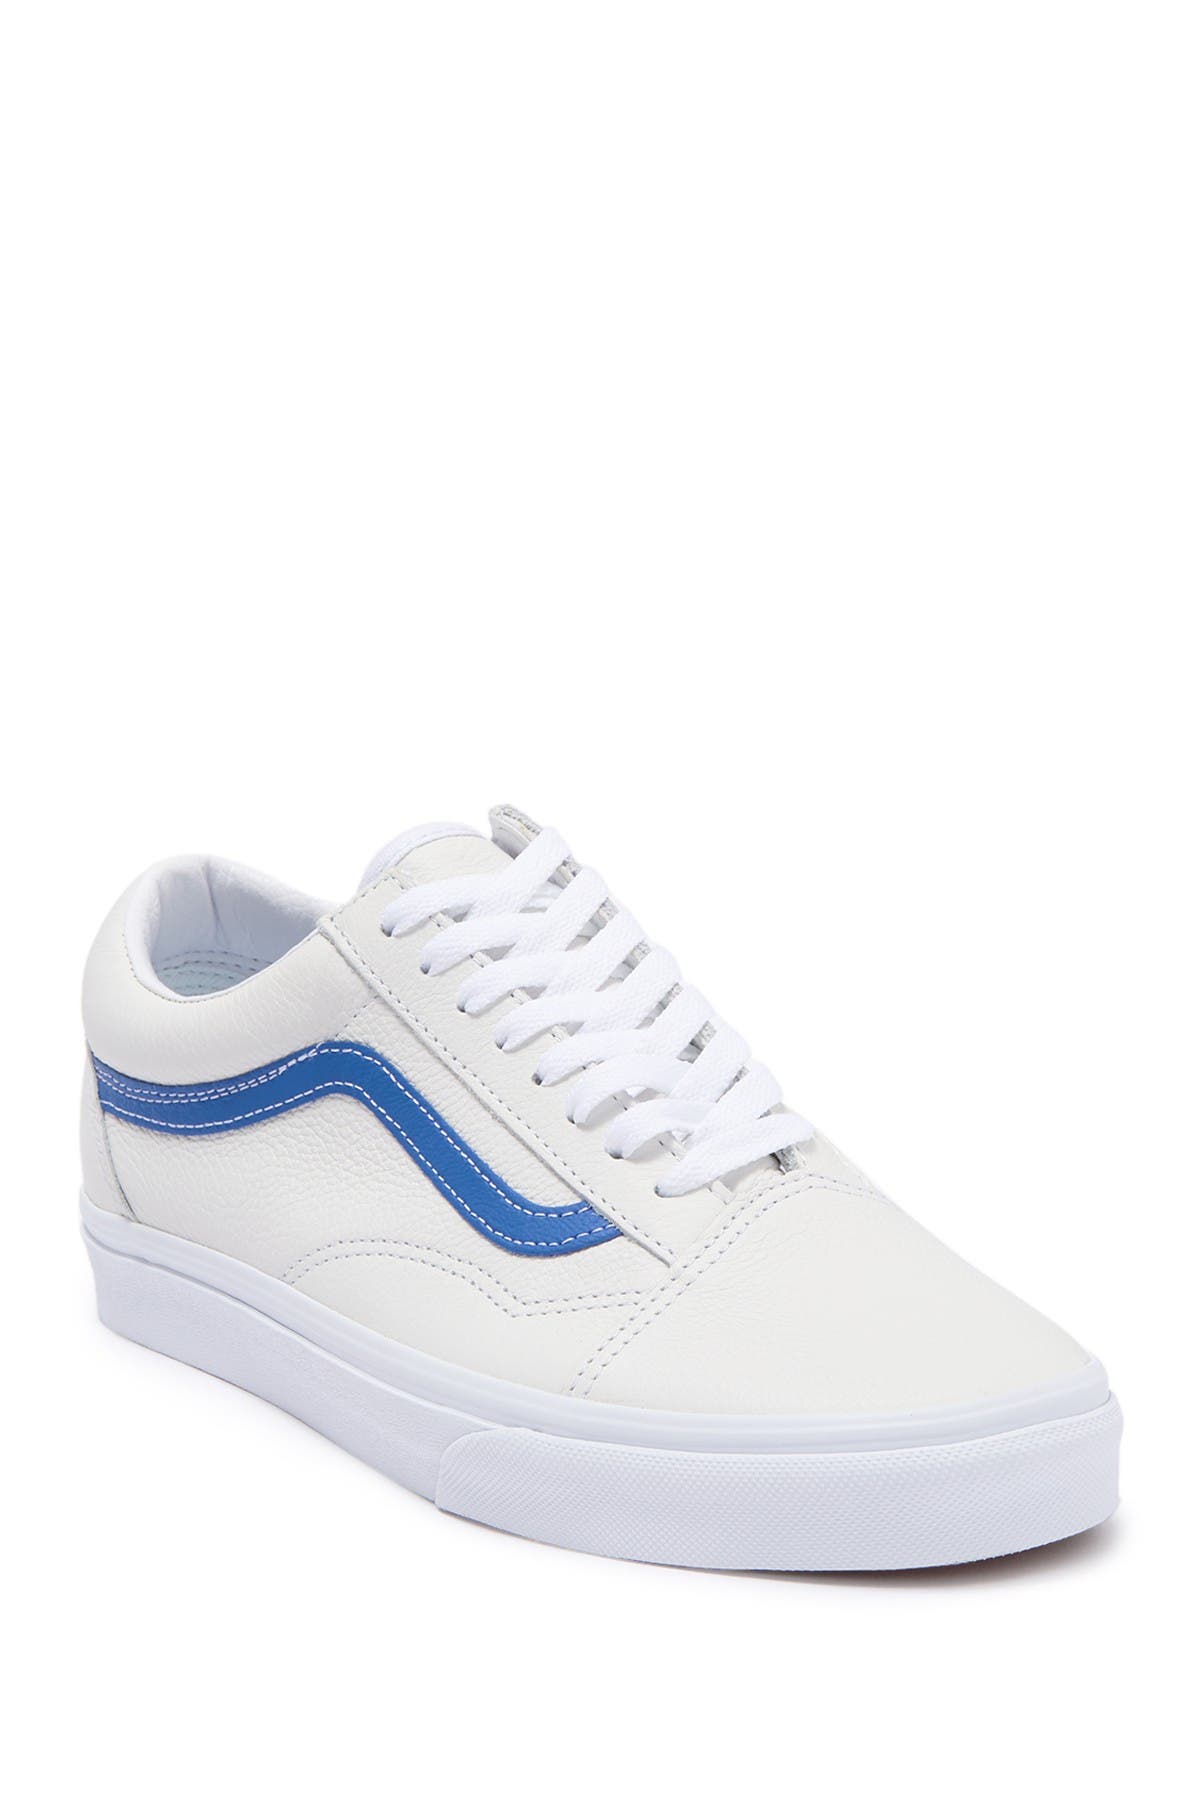 blue vans with leather laces